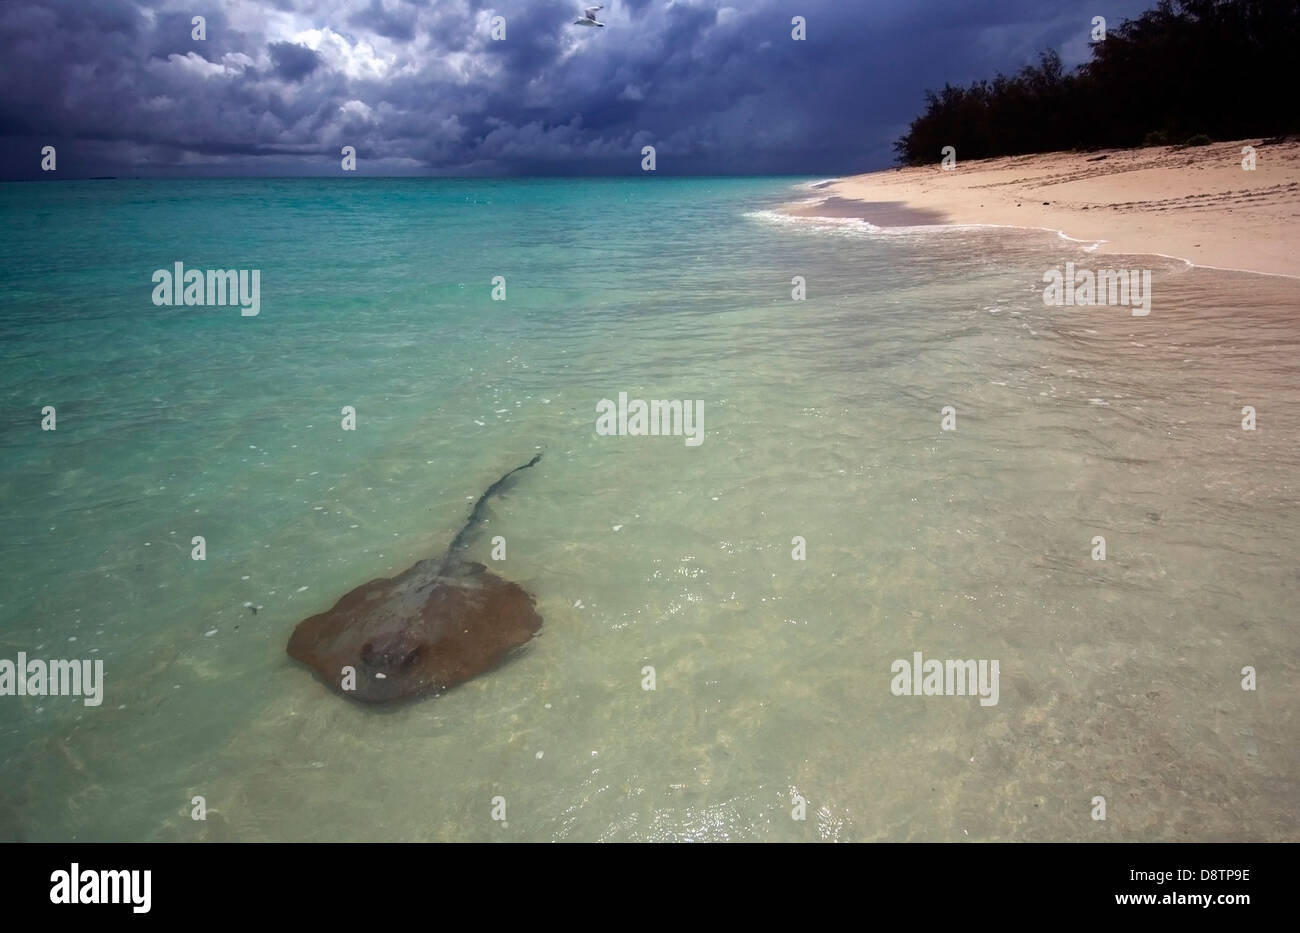 Stingray in shallow water, North West Island, Capricorn Bunker Group, Great Barrier Reef, Queensland, Australia Stock Photo